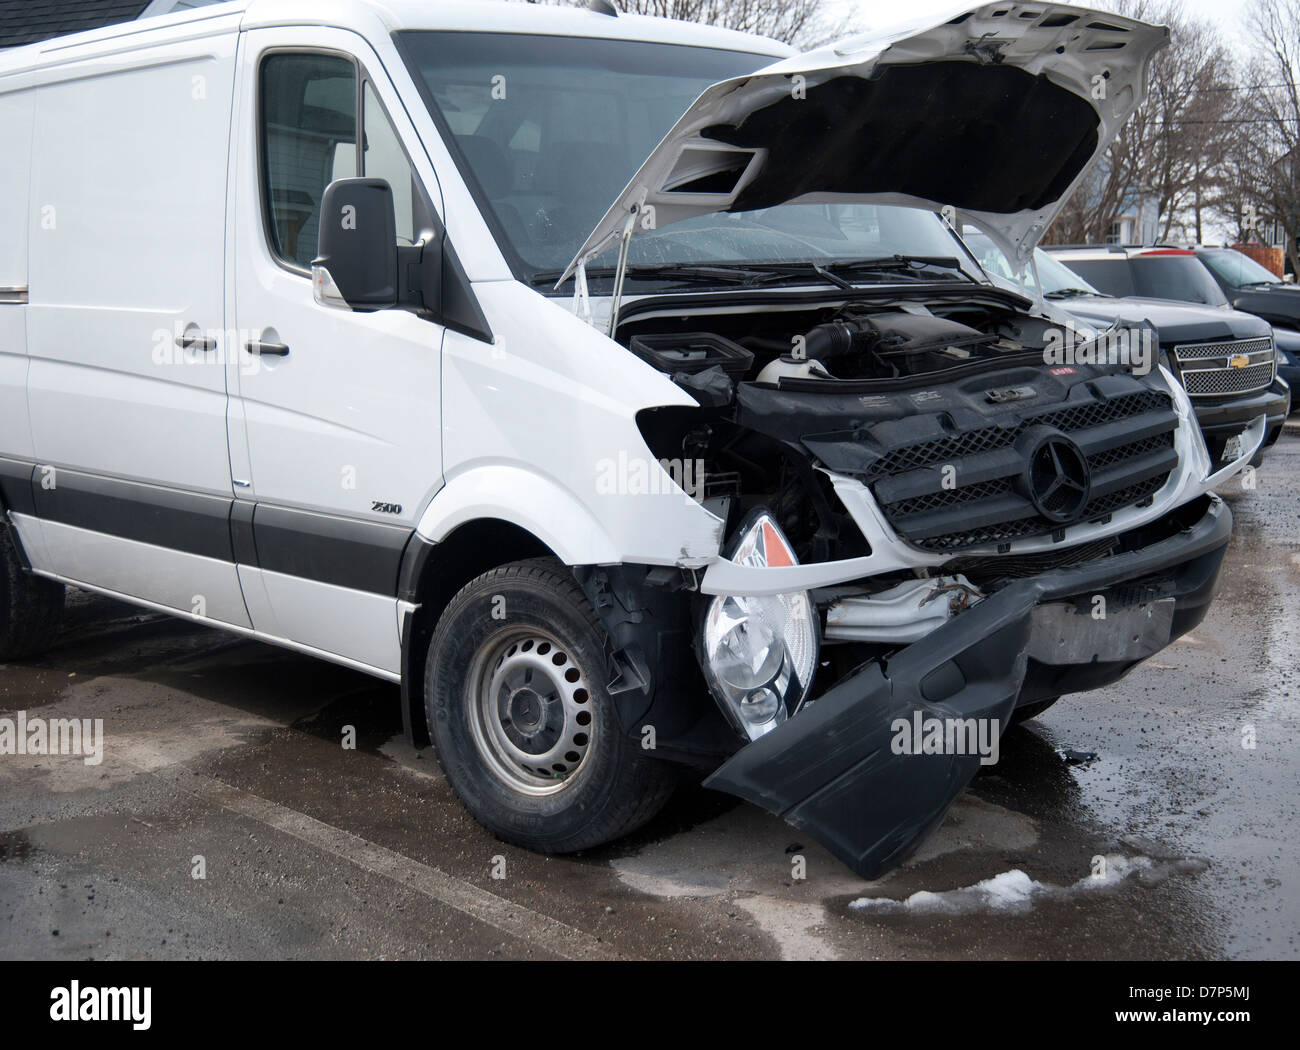 A van that has been in an accident with the front of the vehicle damaged  and the bumper off Stock Photo - Alamy